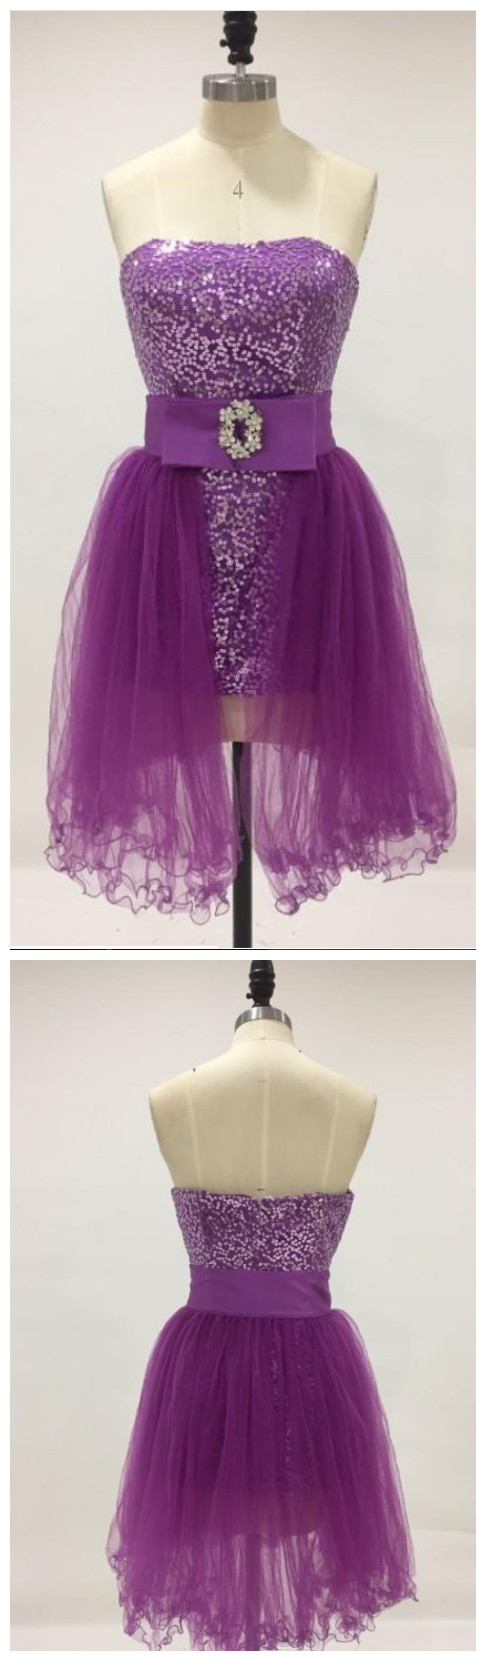 Classic Short Homecoming Dresses ,purple Sheath Column ,short Mini Sequins Party Dress With Removable Tulle Skirt Crystals,lace Appliques Prom